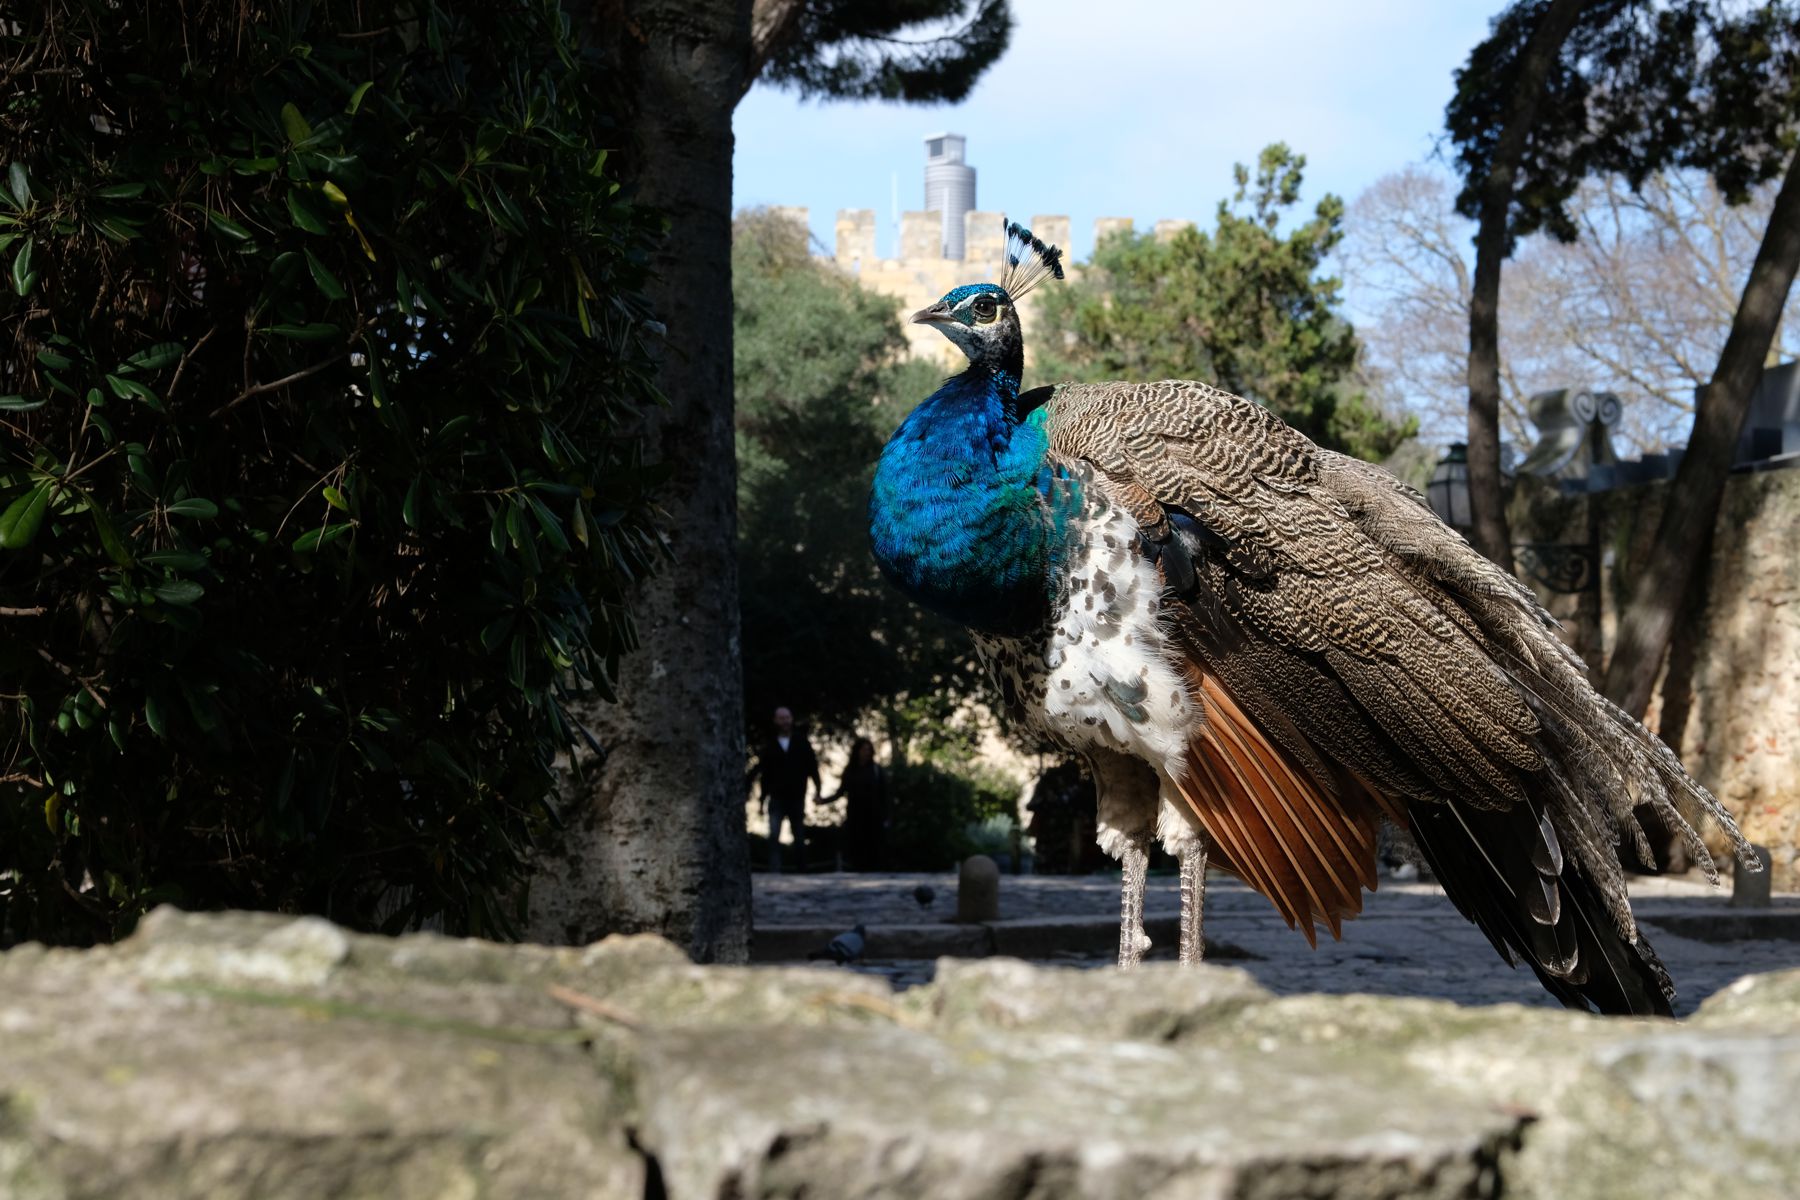 Peacock in St George's castle.